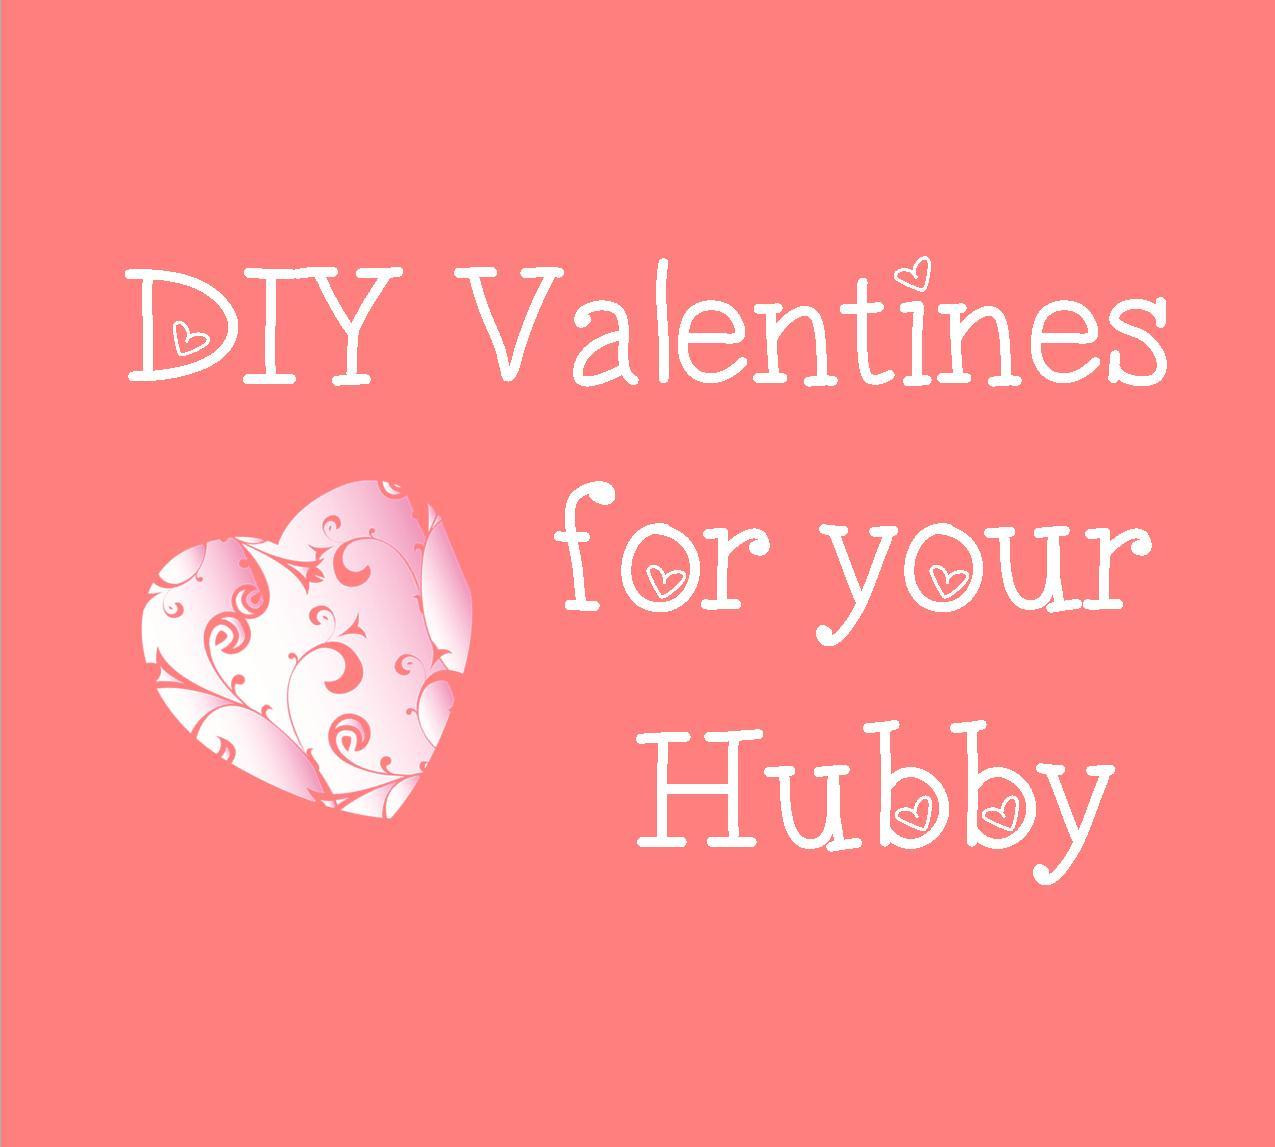 Valentine Gift Ideas For Your Husband
 Crafty WI Mama Valentines for the Hubby